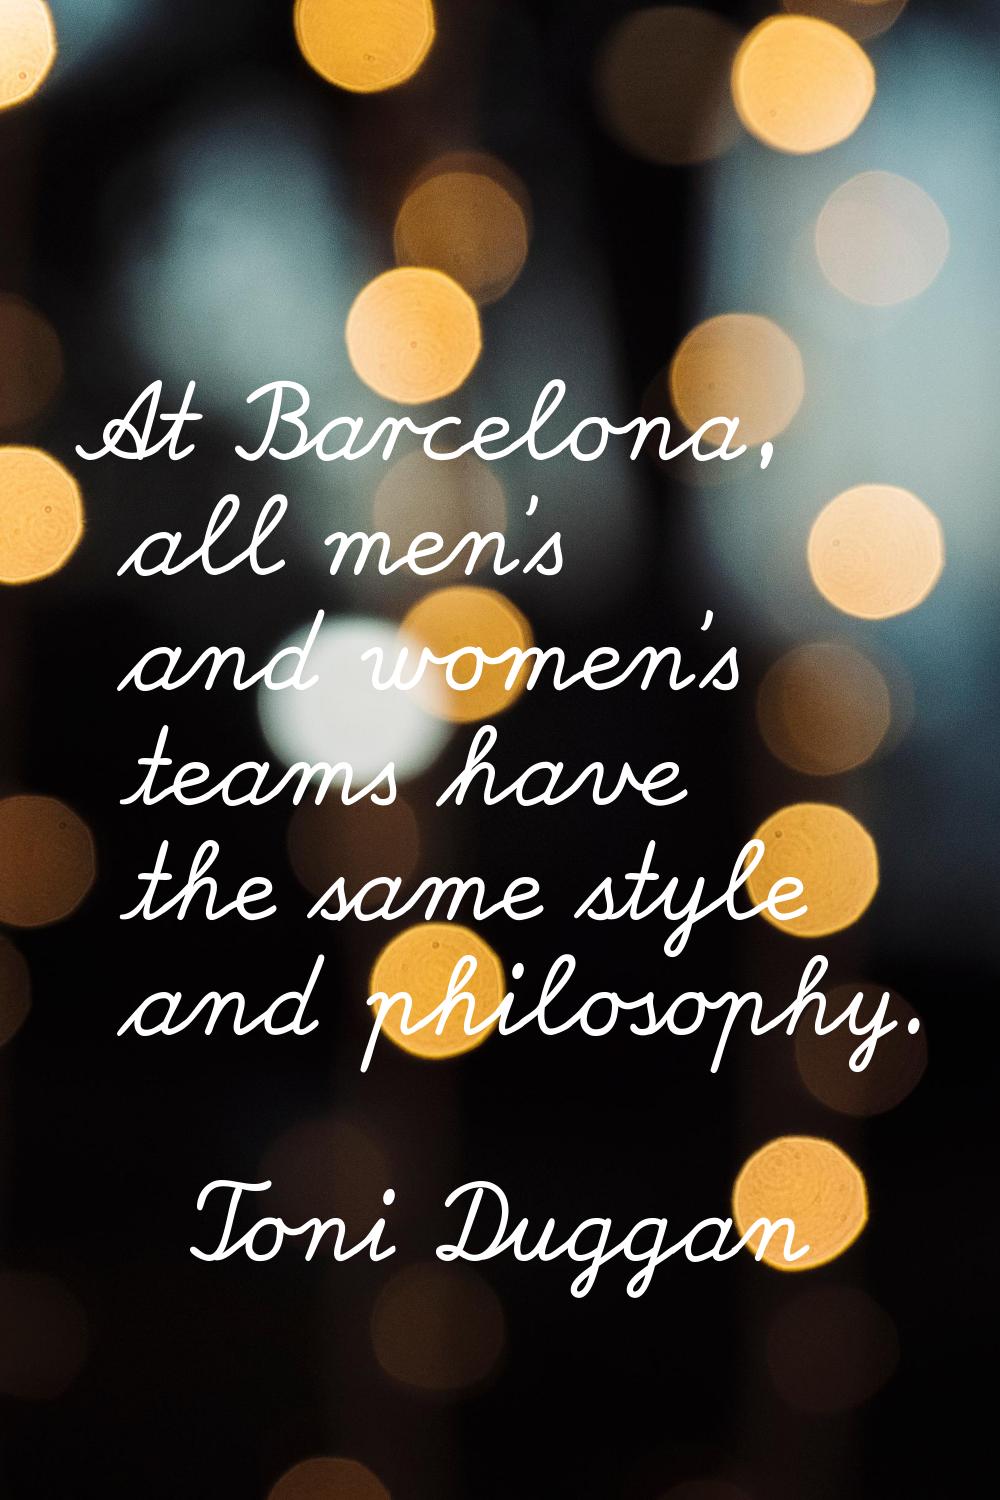 At Barcelona, all men's and women's teams have the same style and philosophy.